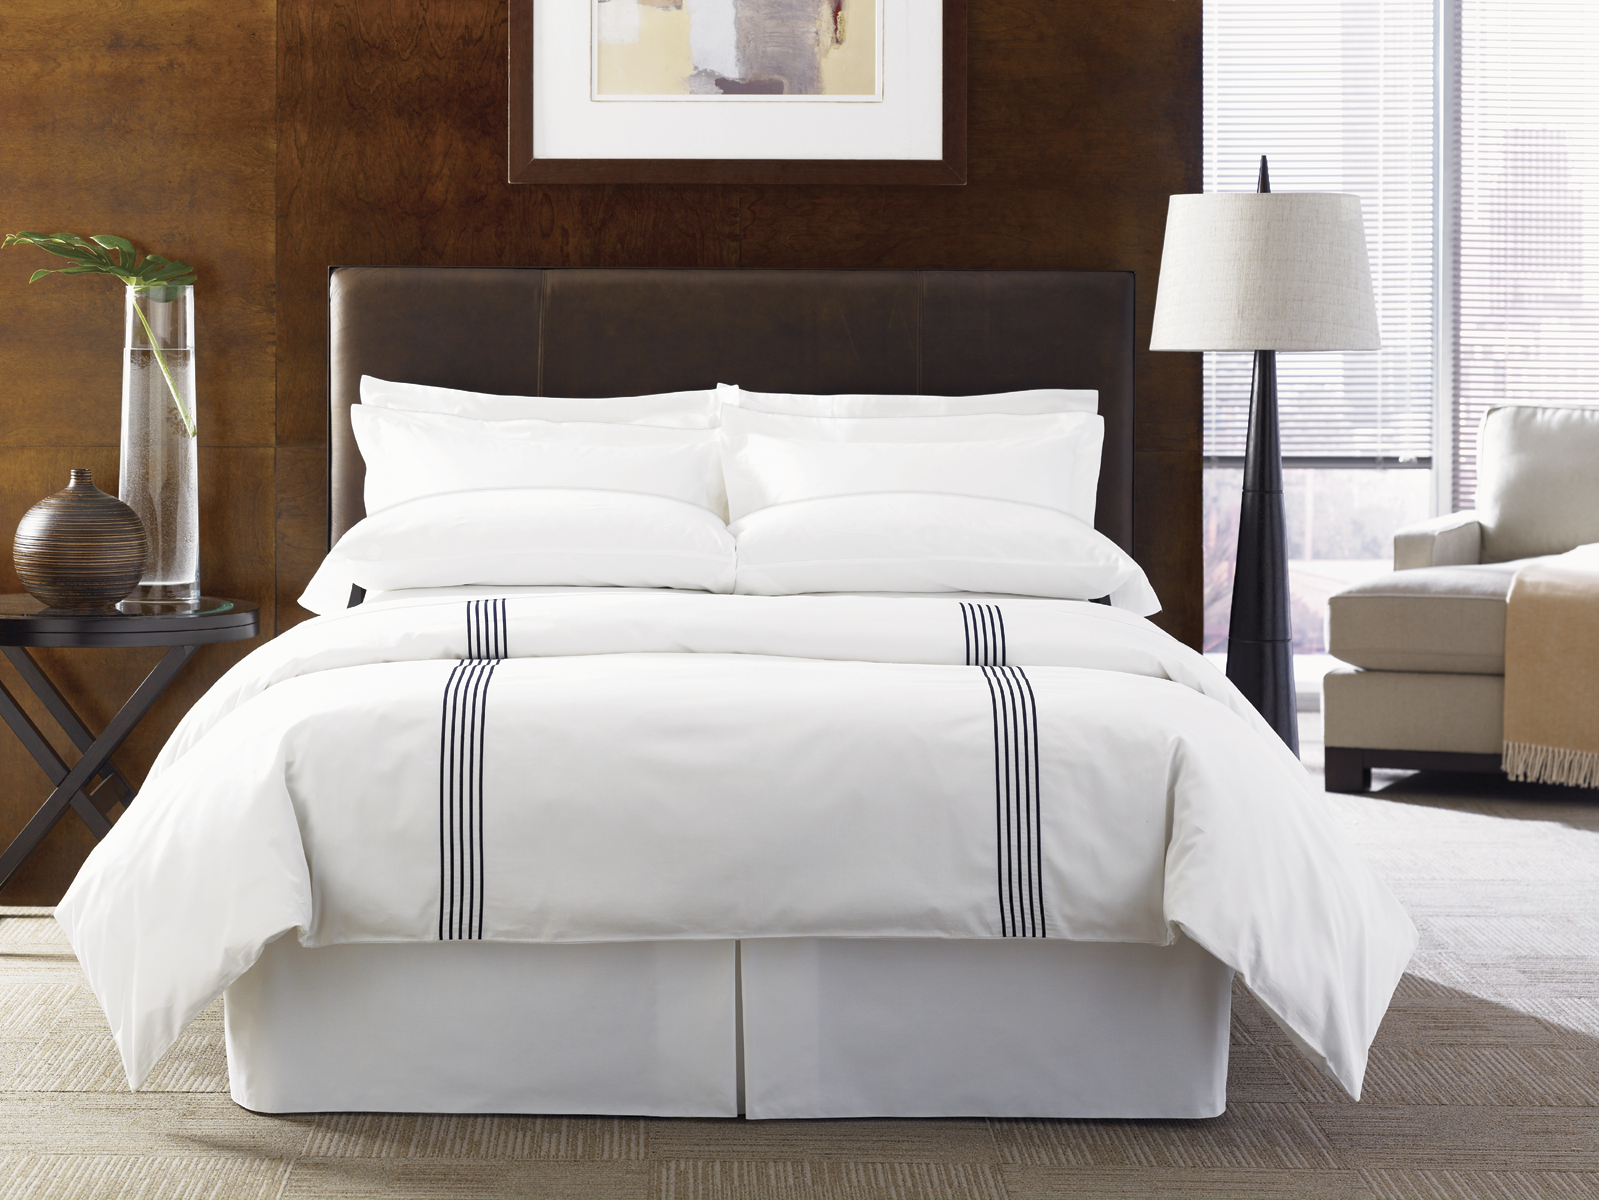 8 rules for hotel bedding to improve ROI